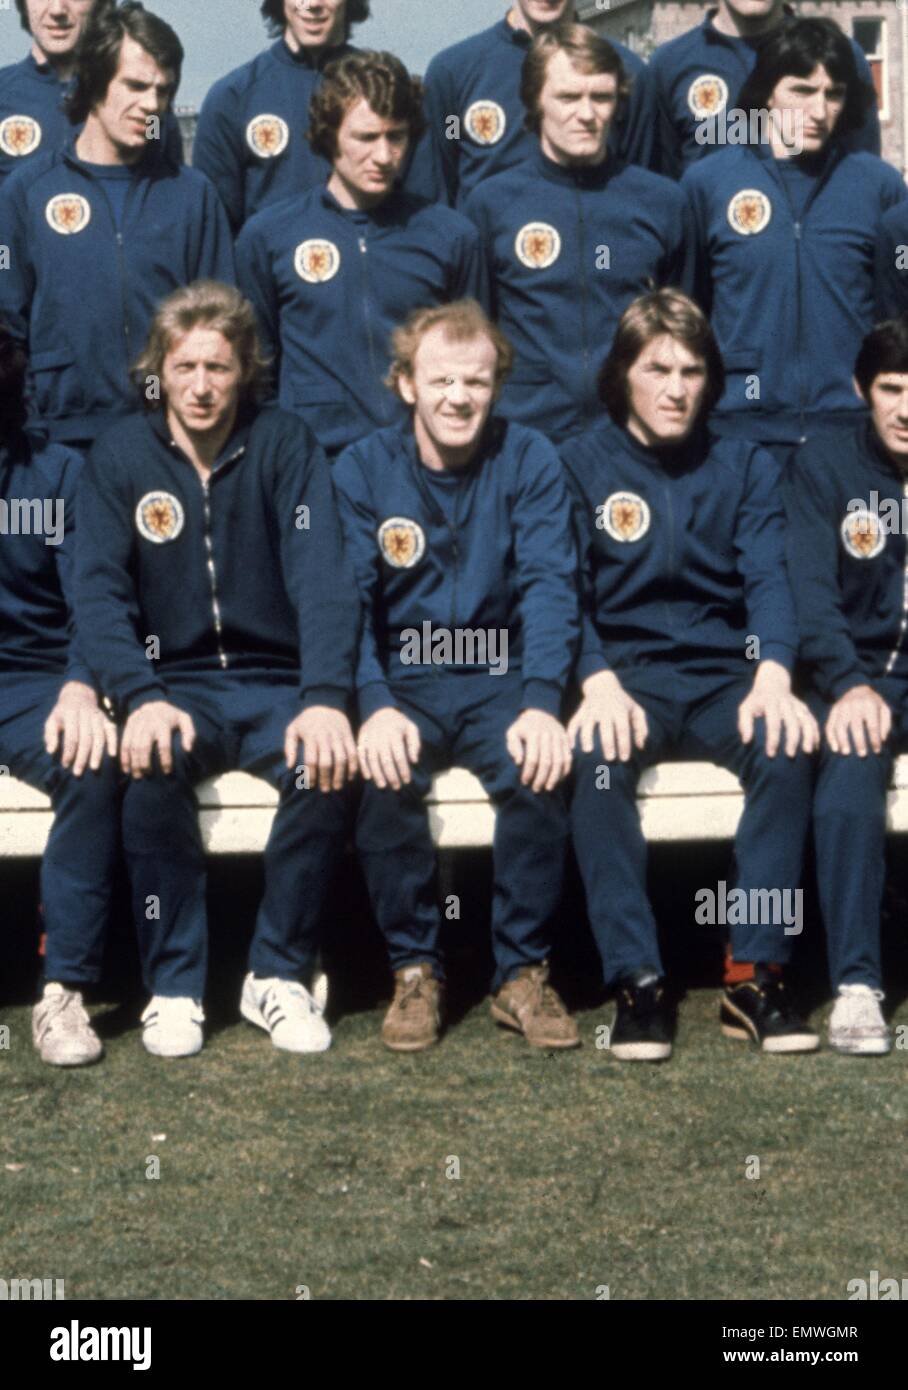 Scottish Football team photo 1974. May 1974. l-r front row: Denis Law, Archie Gemmel and Kenny Dalglish. Stock Photo